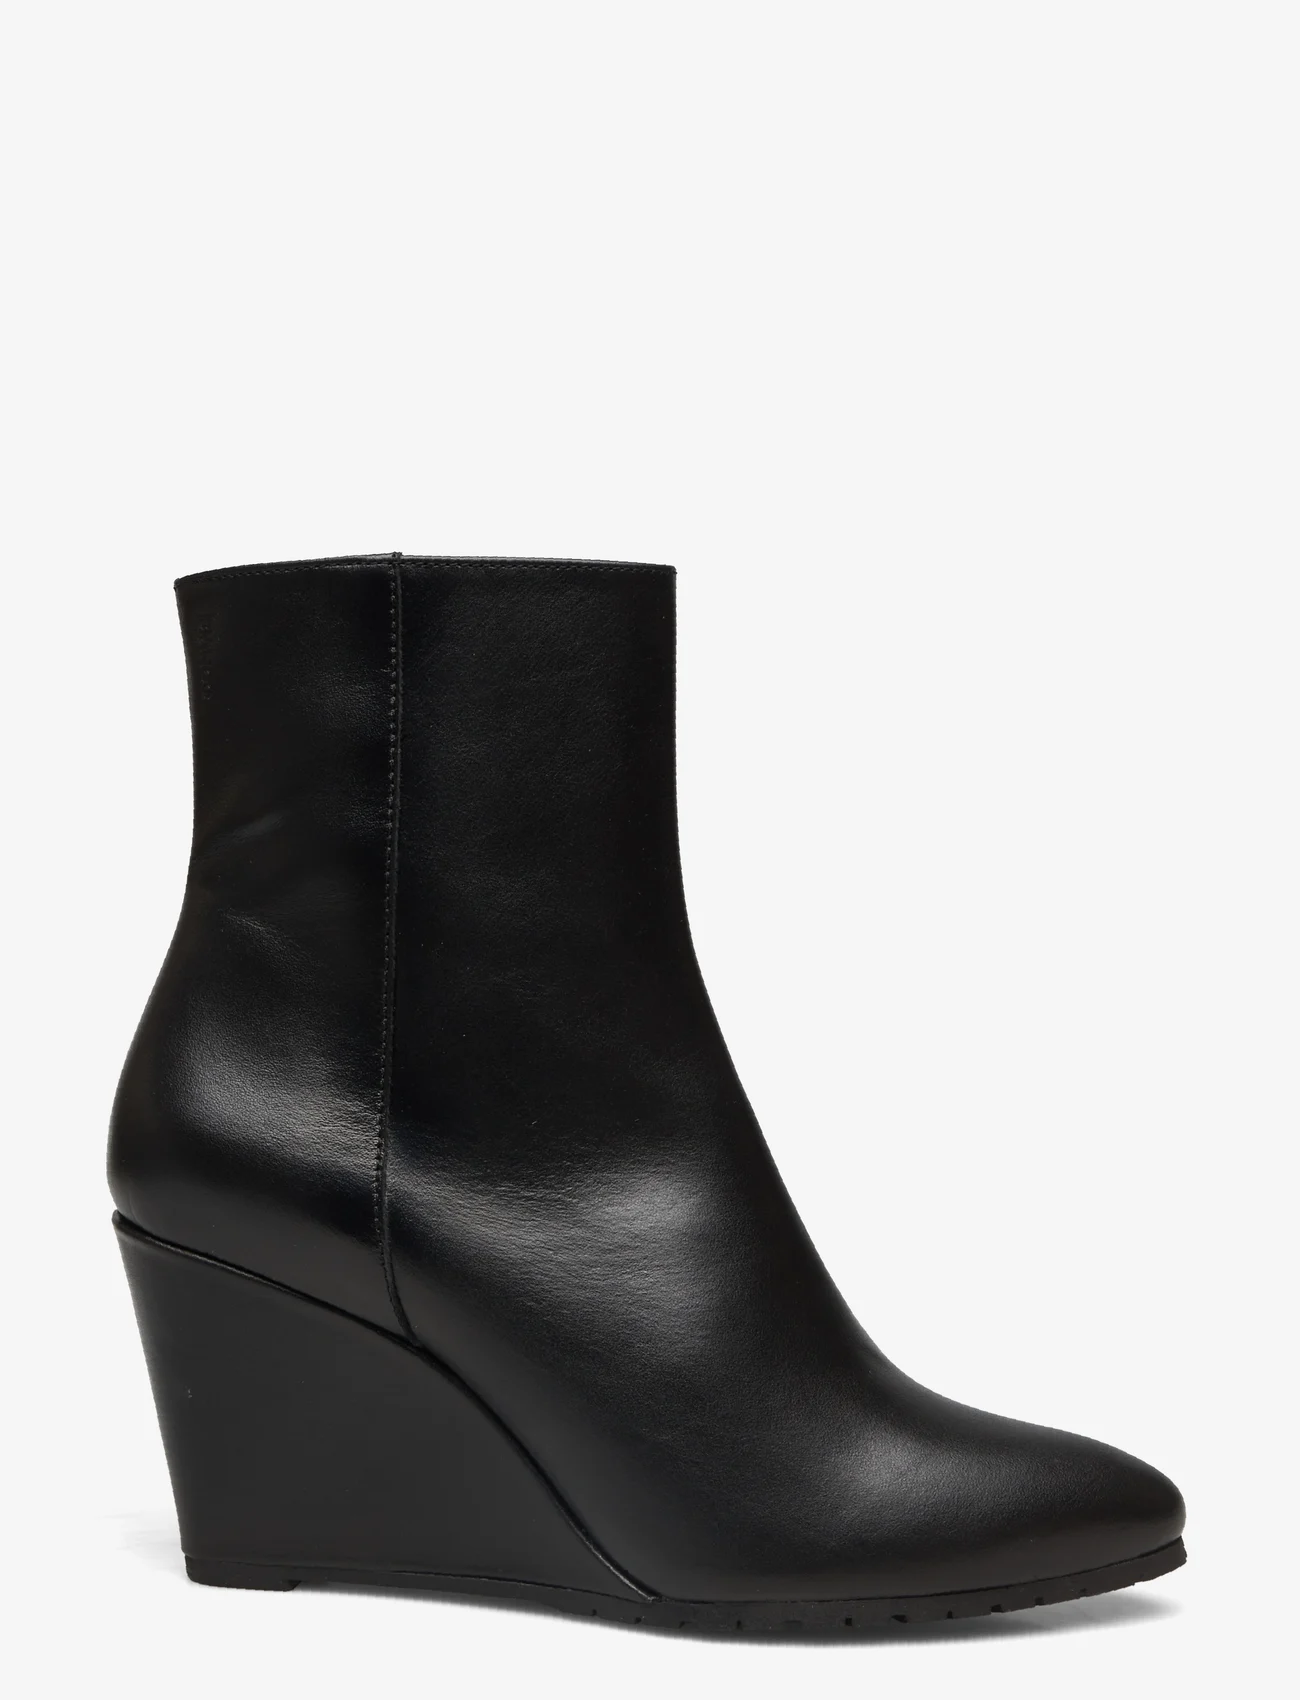 Bianco - BIATINA Wedge Ankle Boot Crust - heeled ankle boots - black - 1